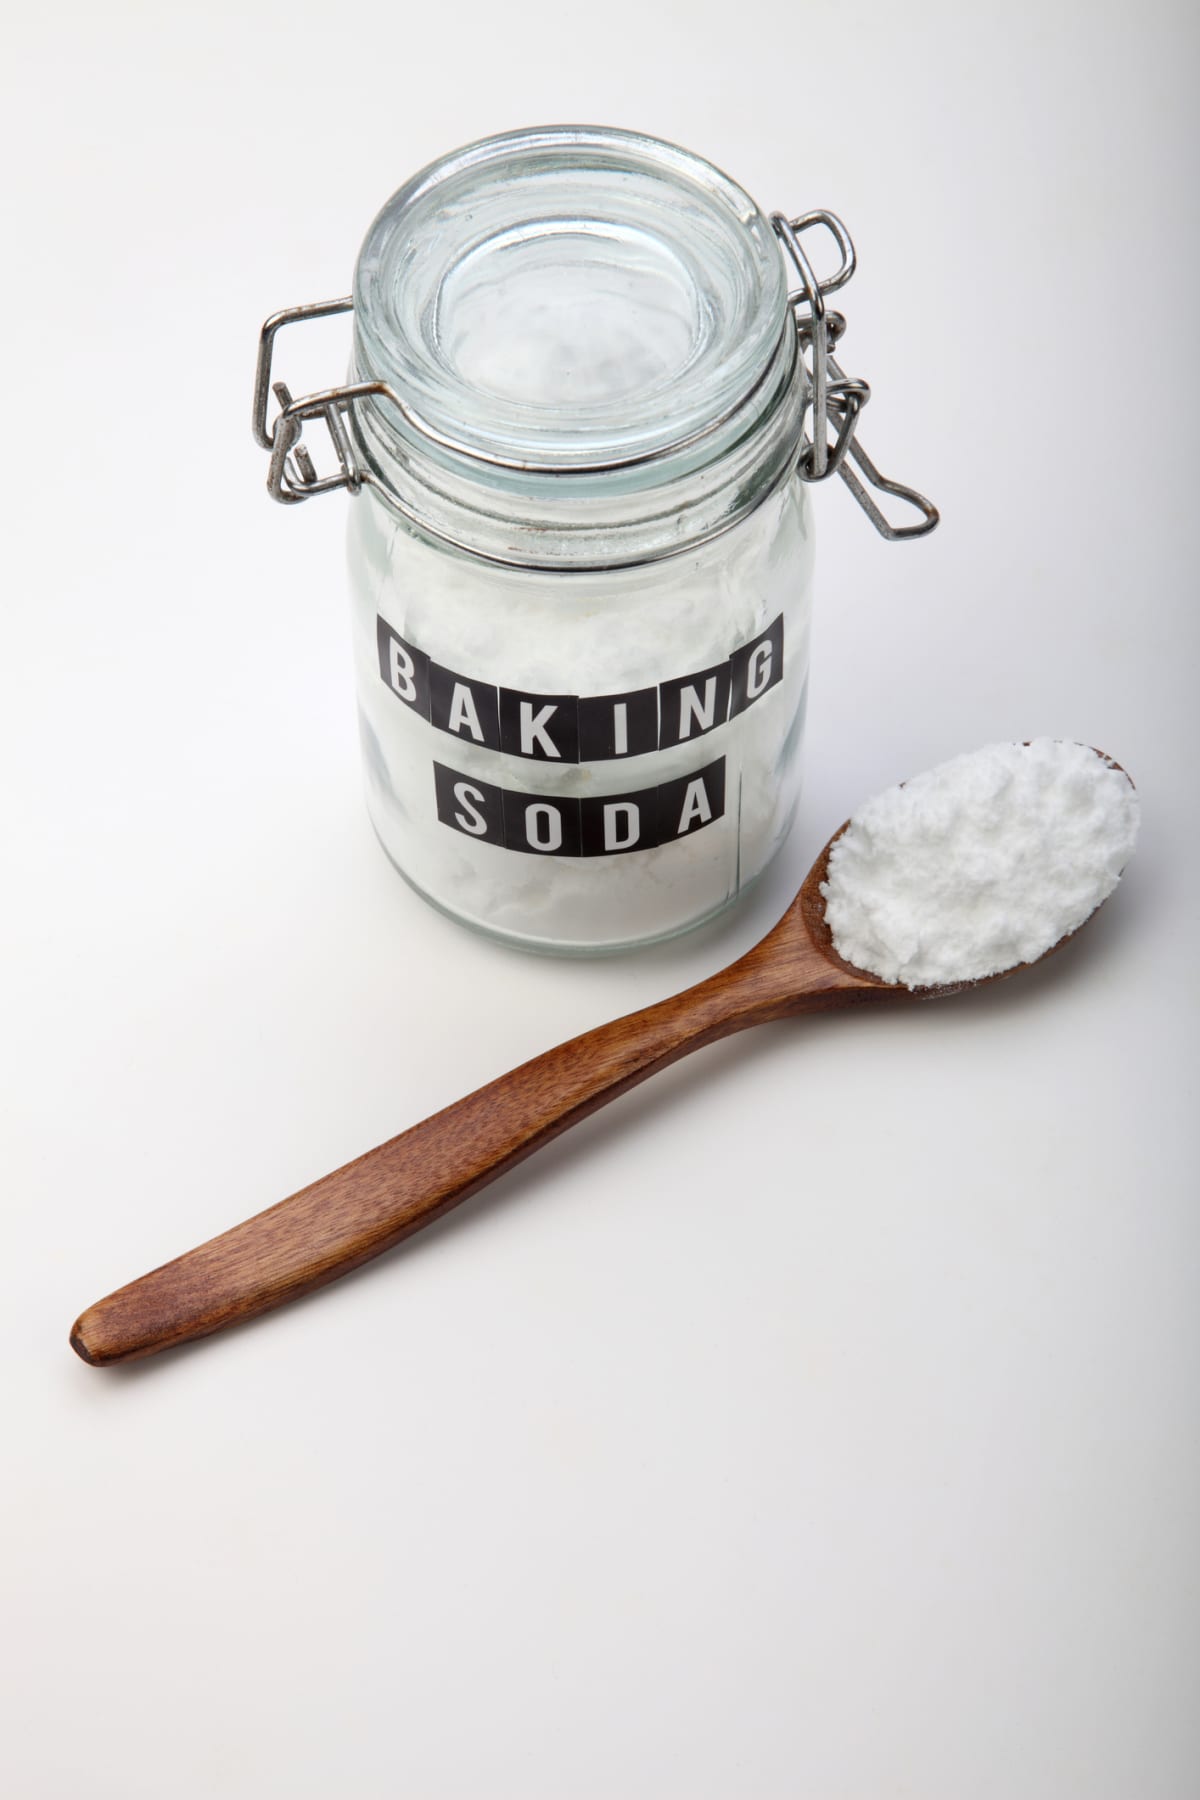 A jar of baking soda and a wooden spoon